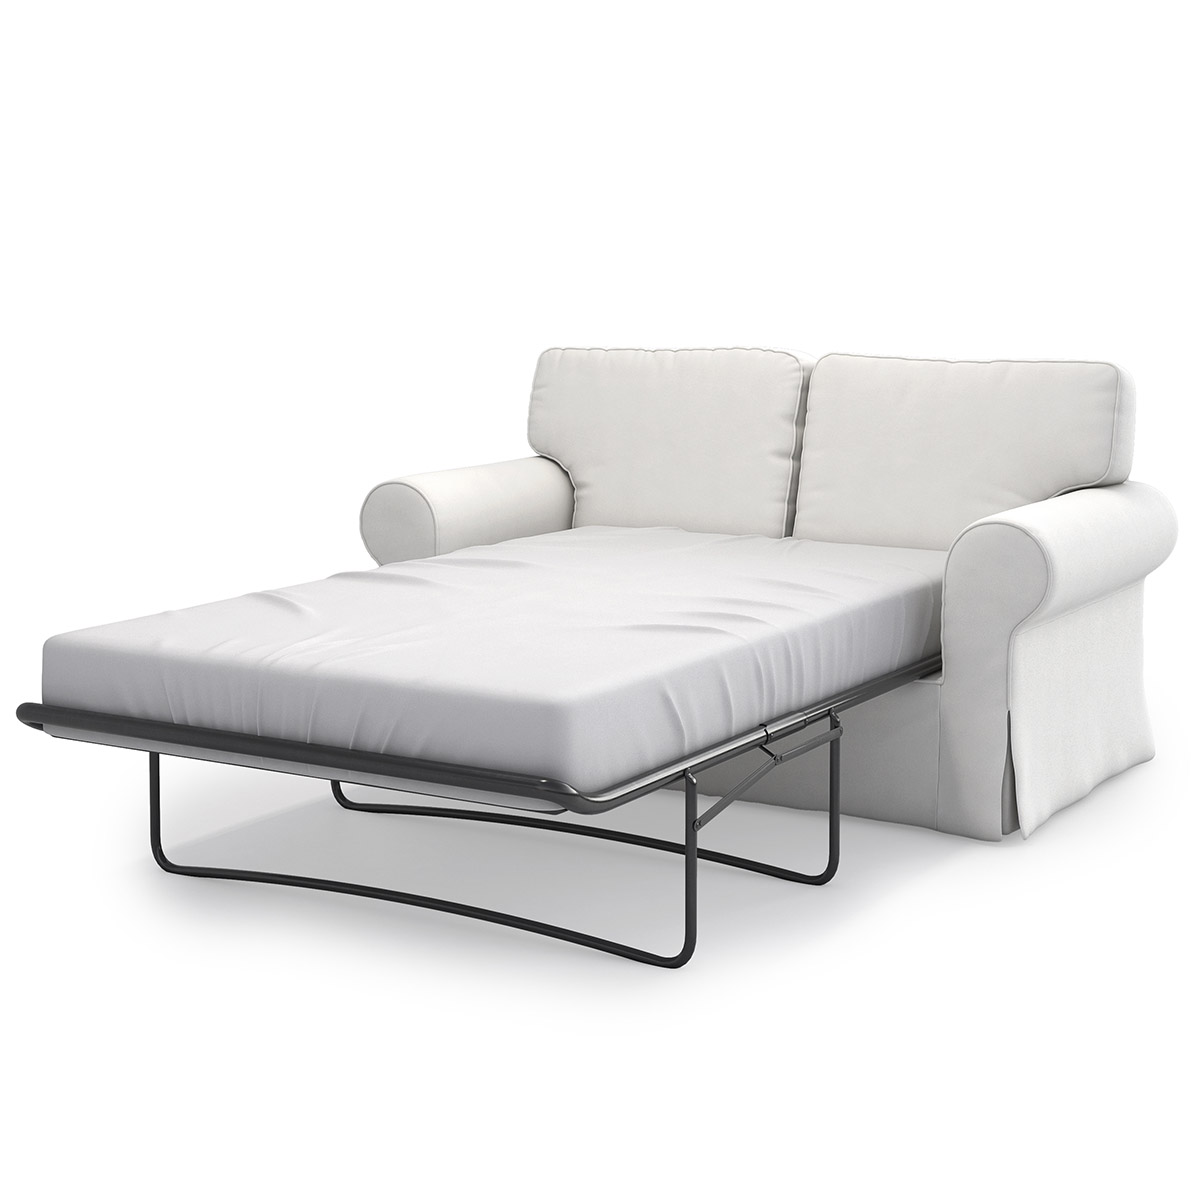 Ektorp 2 Seater Sofa Bed Cover - Masters of